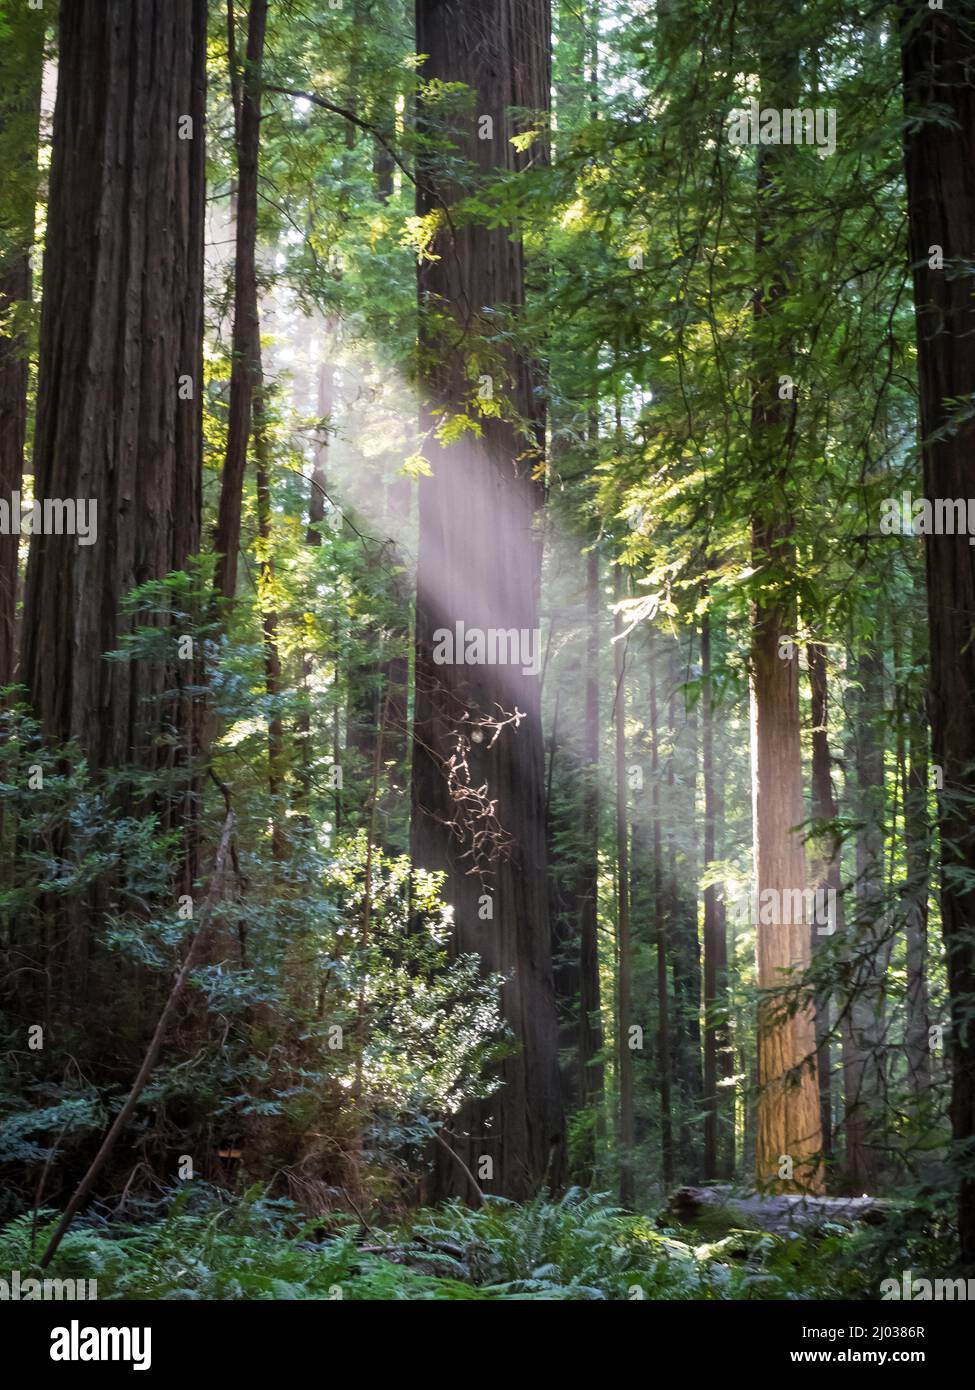 Sun shining through the redwoods, Avenue of Giants, Humboldt Redwoods State Park, California, United States of America, North America Stock Photo